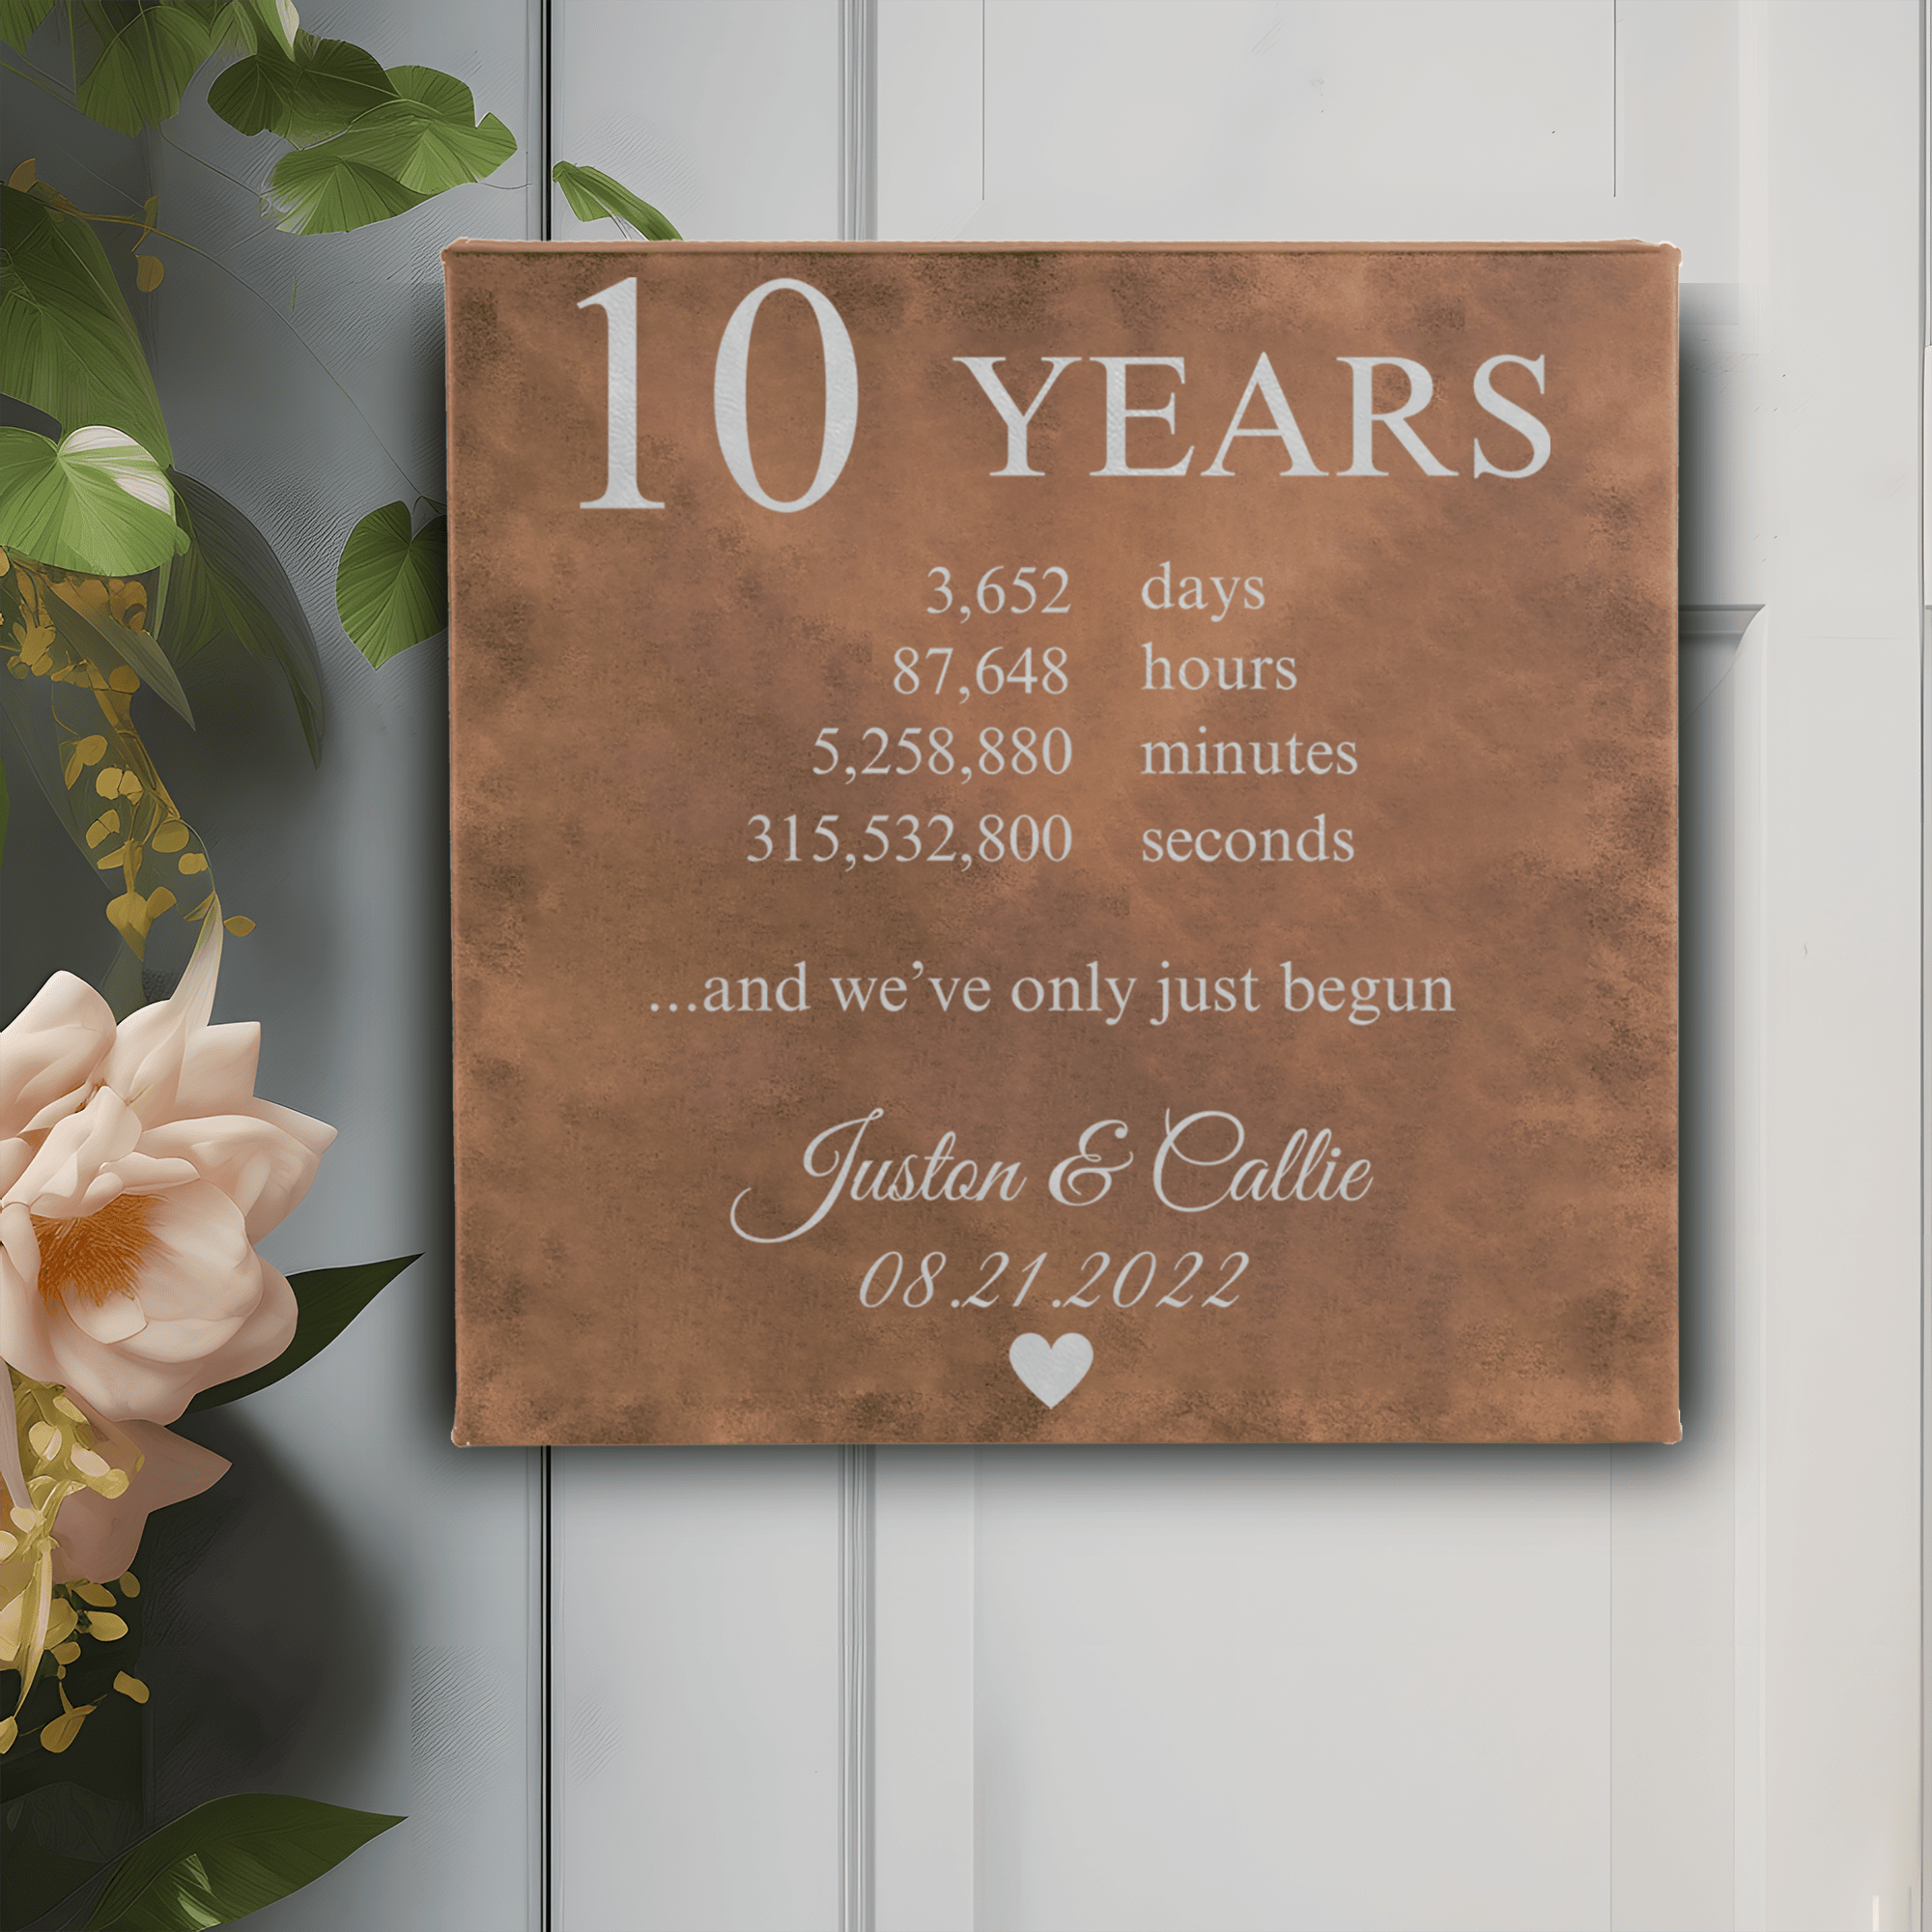 Rustic Silver Leather Wall Decor With 10 Year Anniversary Design